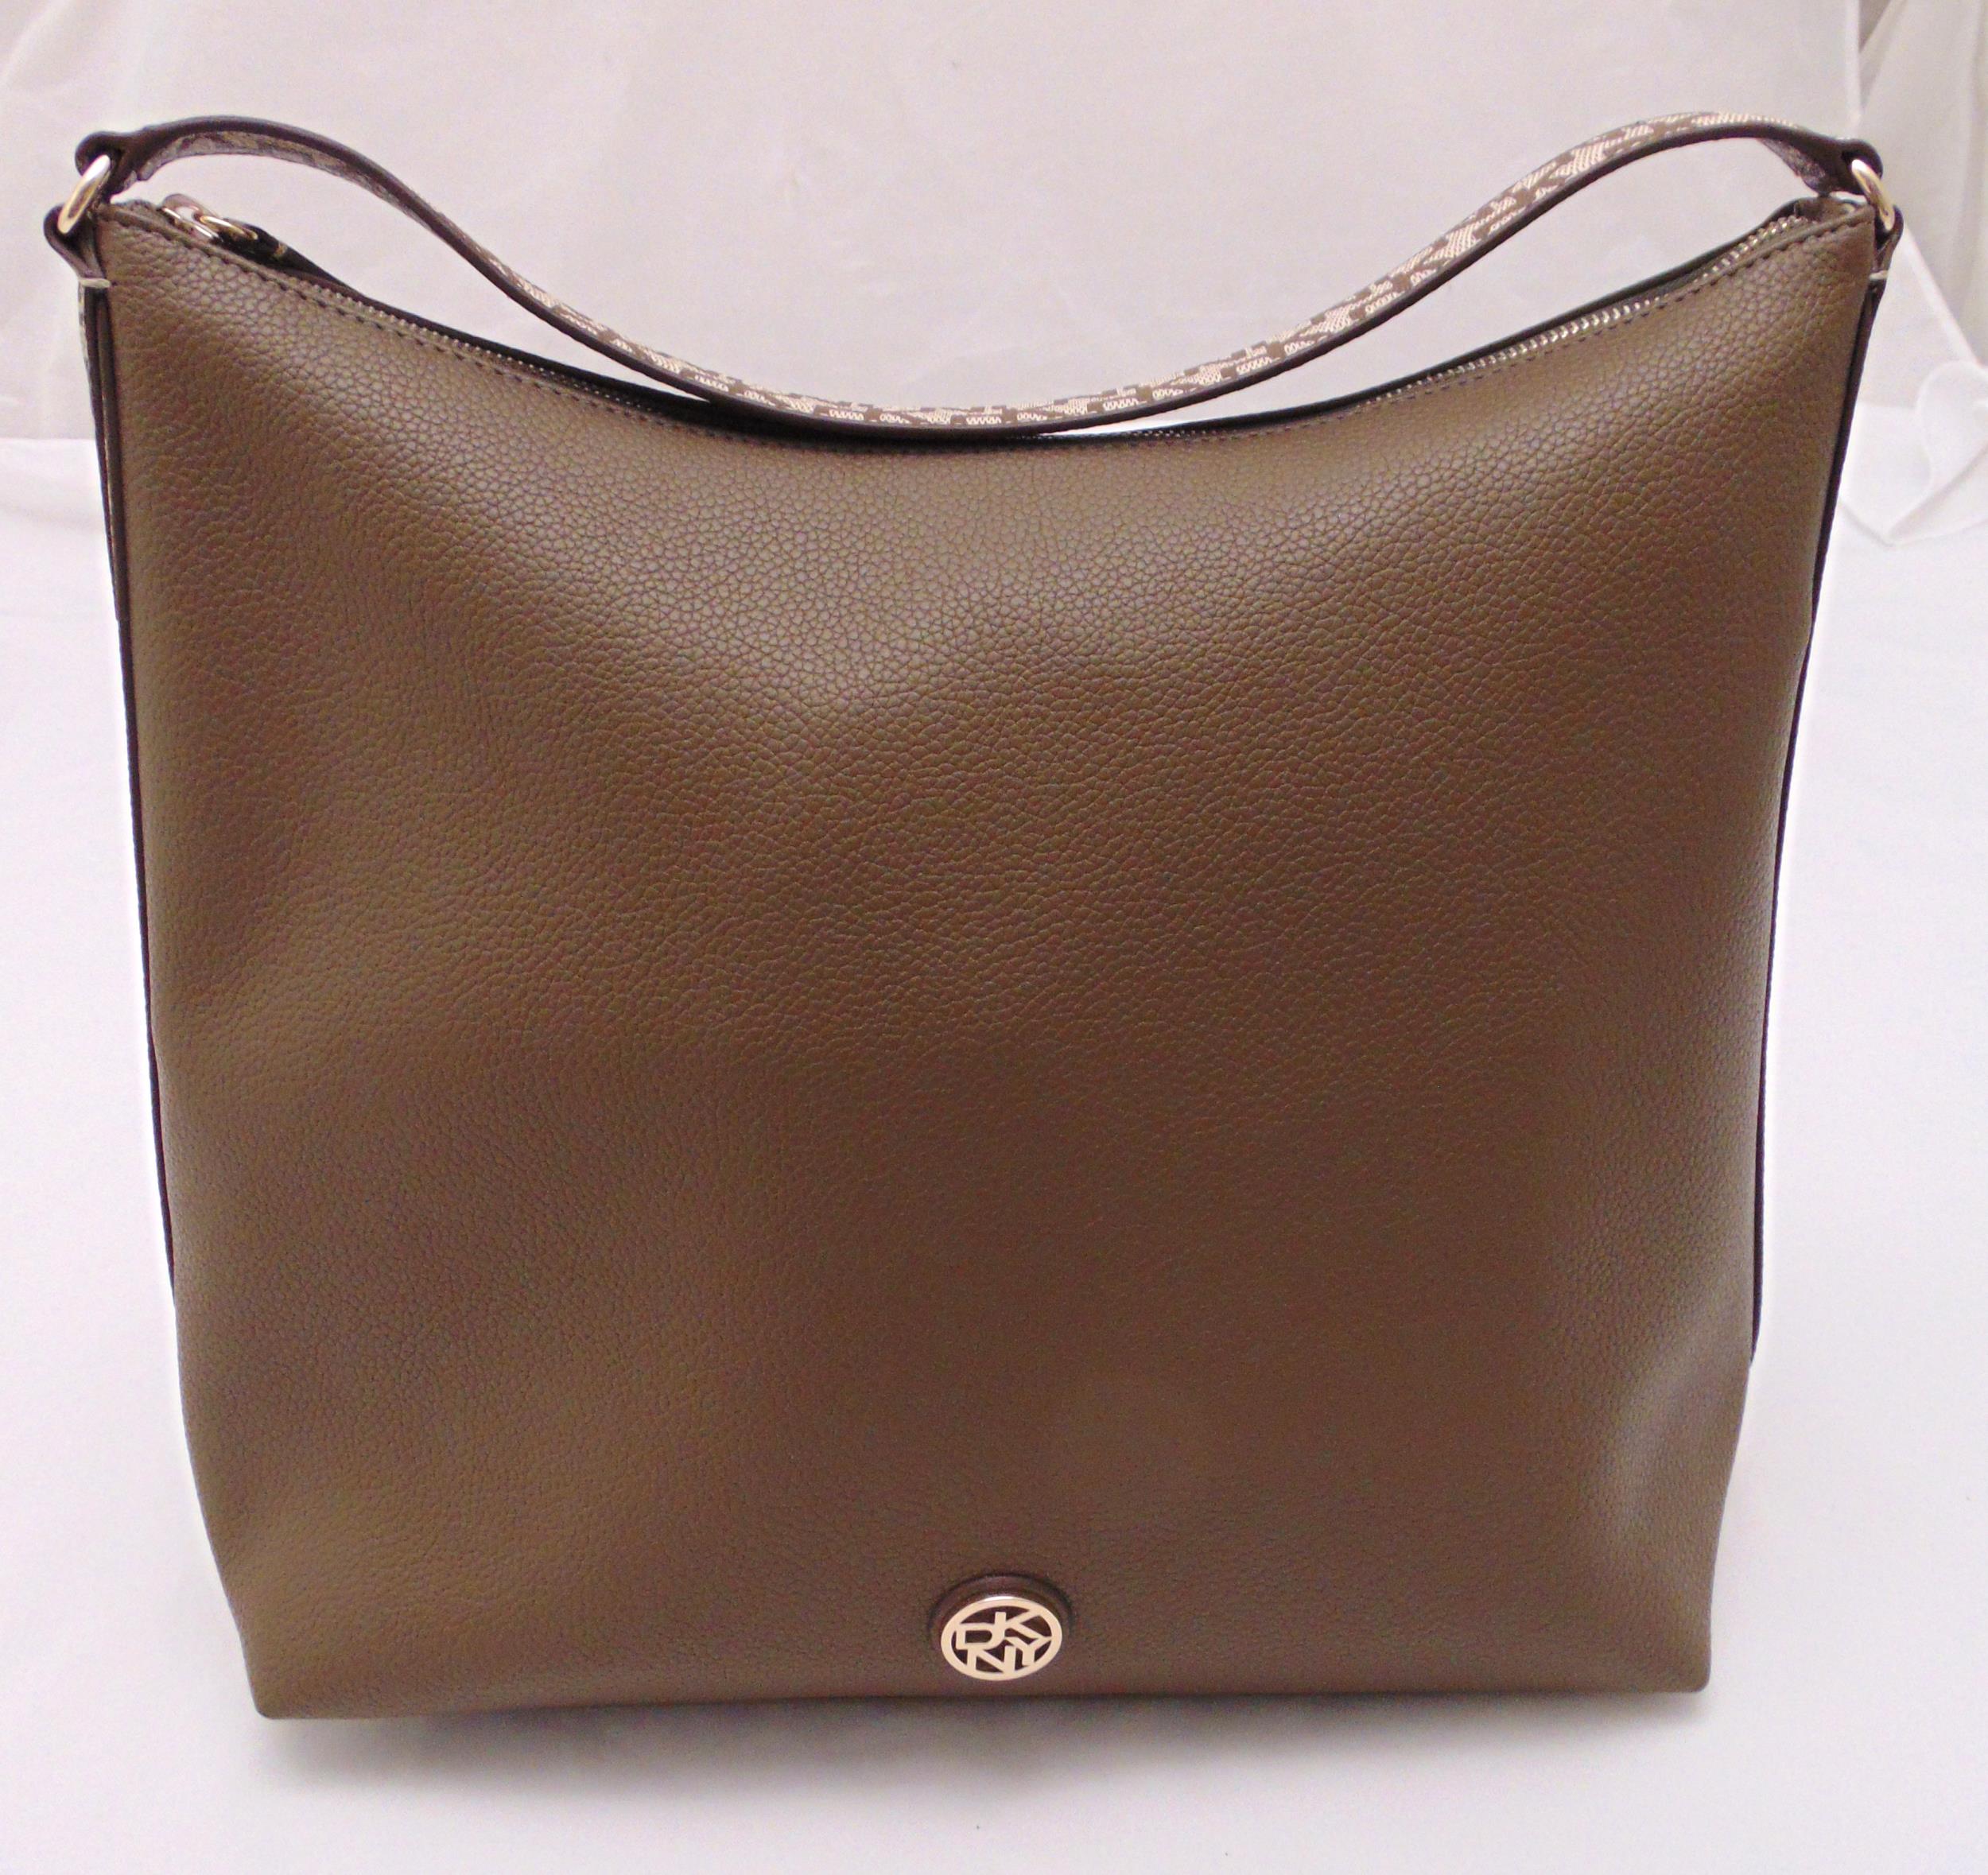 DKNY ladies taupe leather tote bag